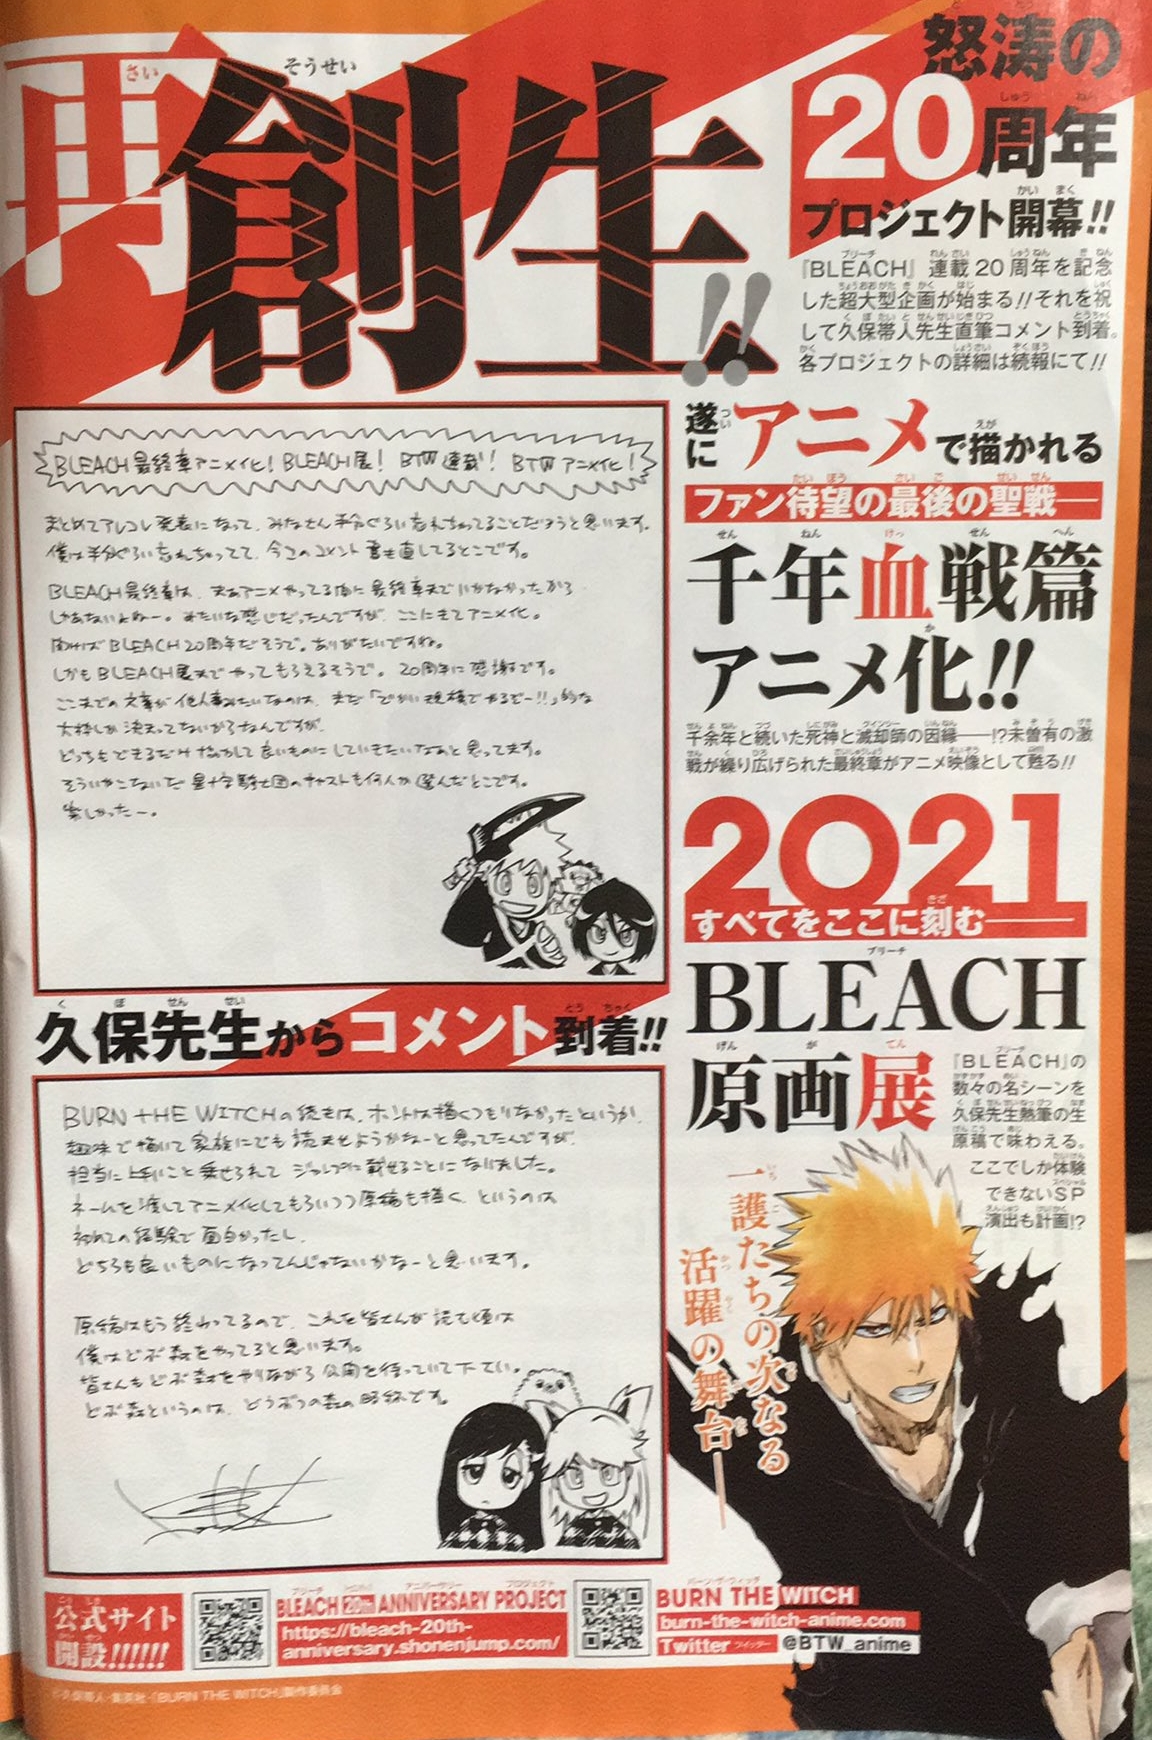 And our boy was right welcome back Bleach Its been a while weve missed  you  rbleach